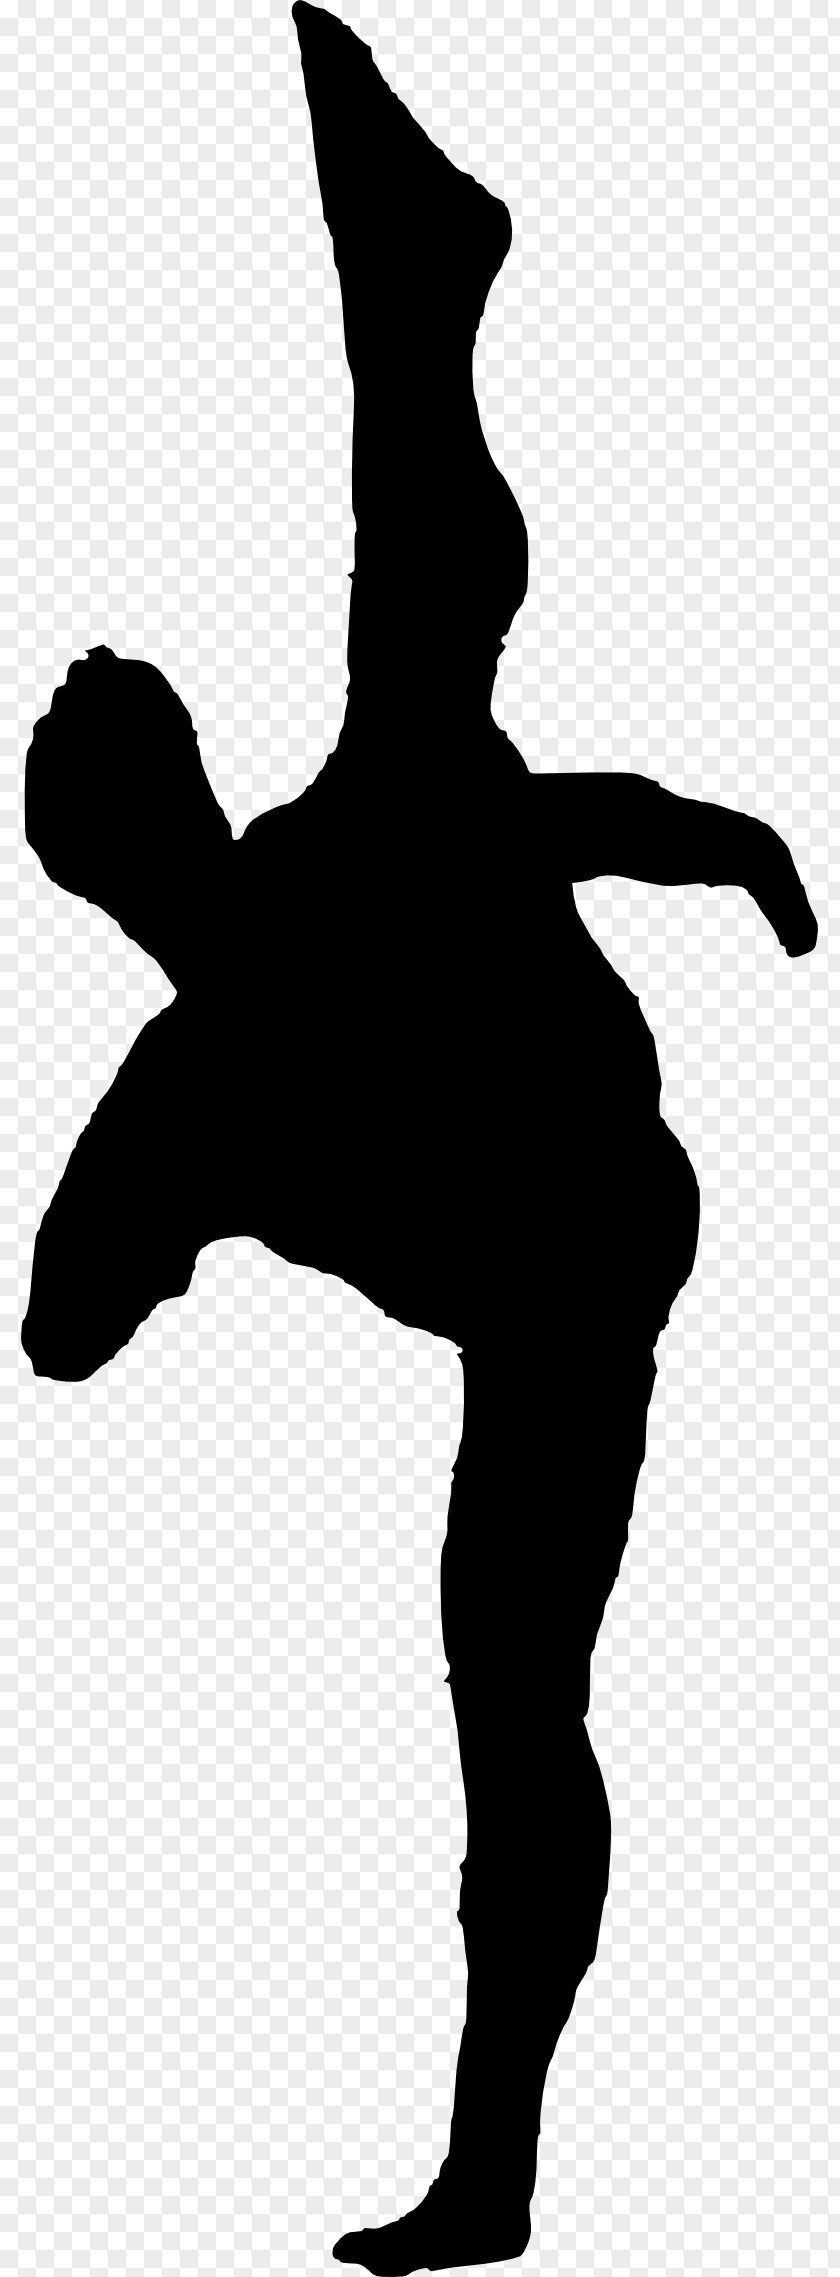 Basketball Silhouette Photography PNG